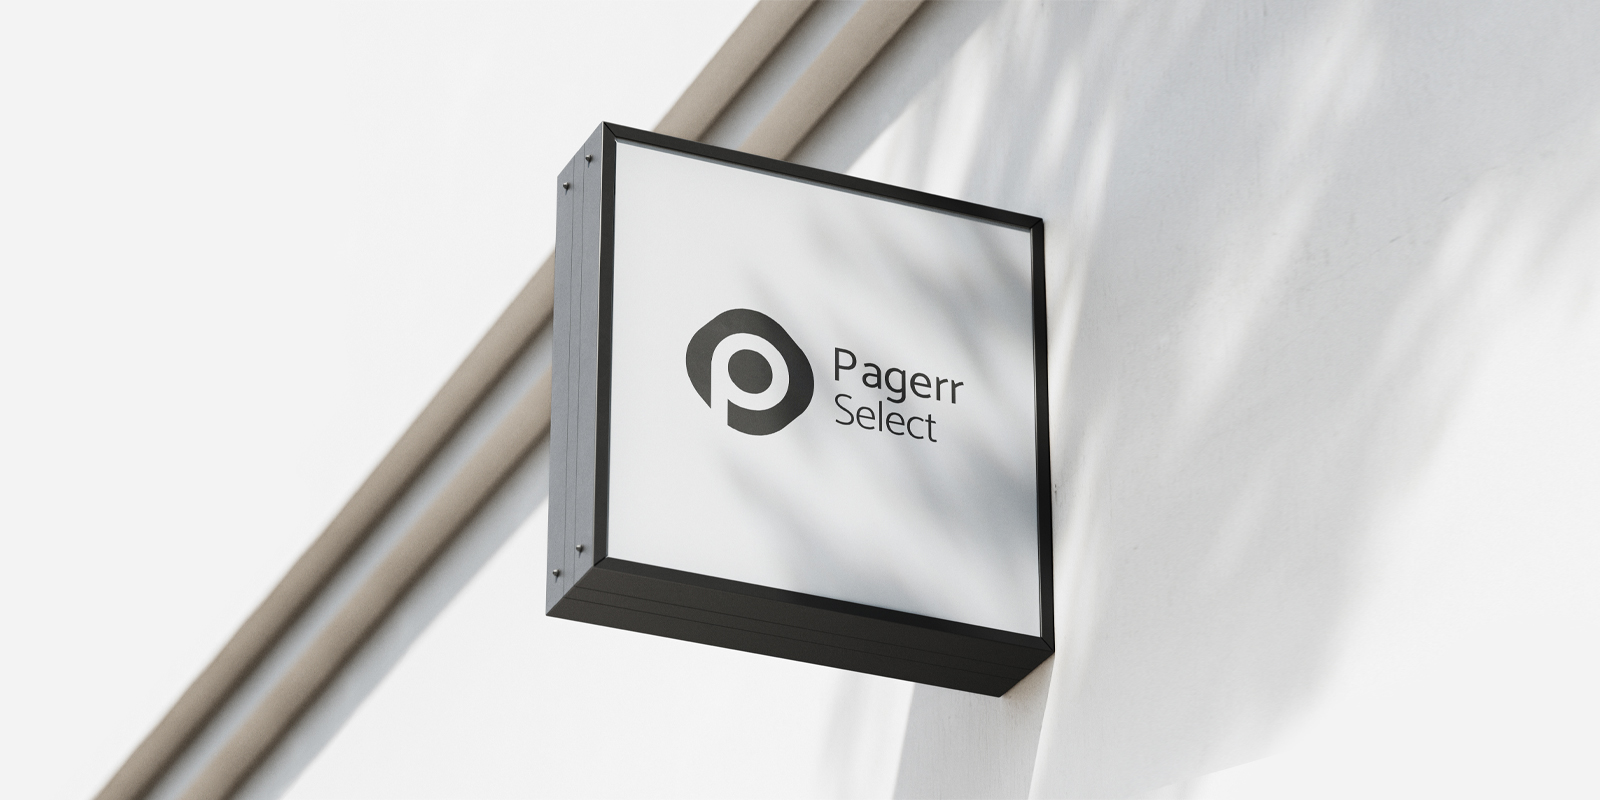 Essential signs in Tallinn - Print with Pagerr